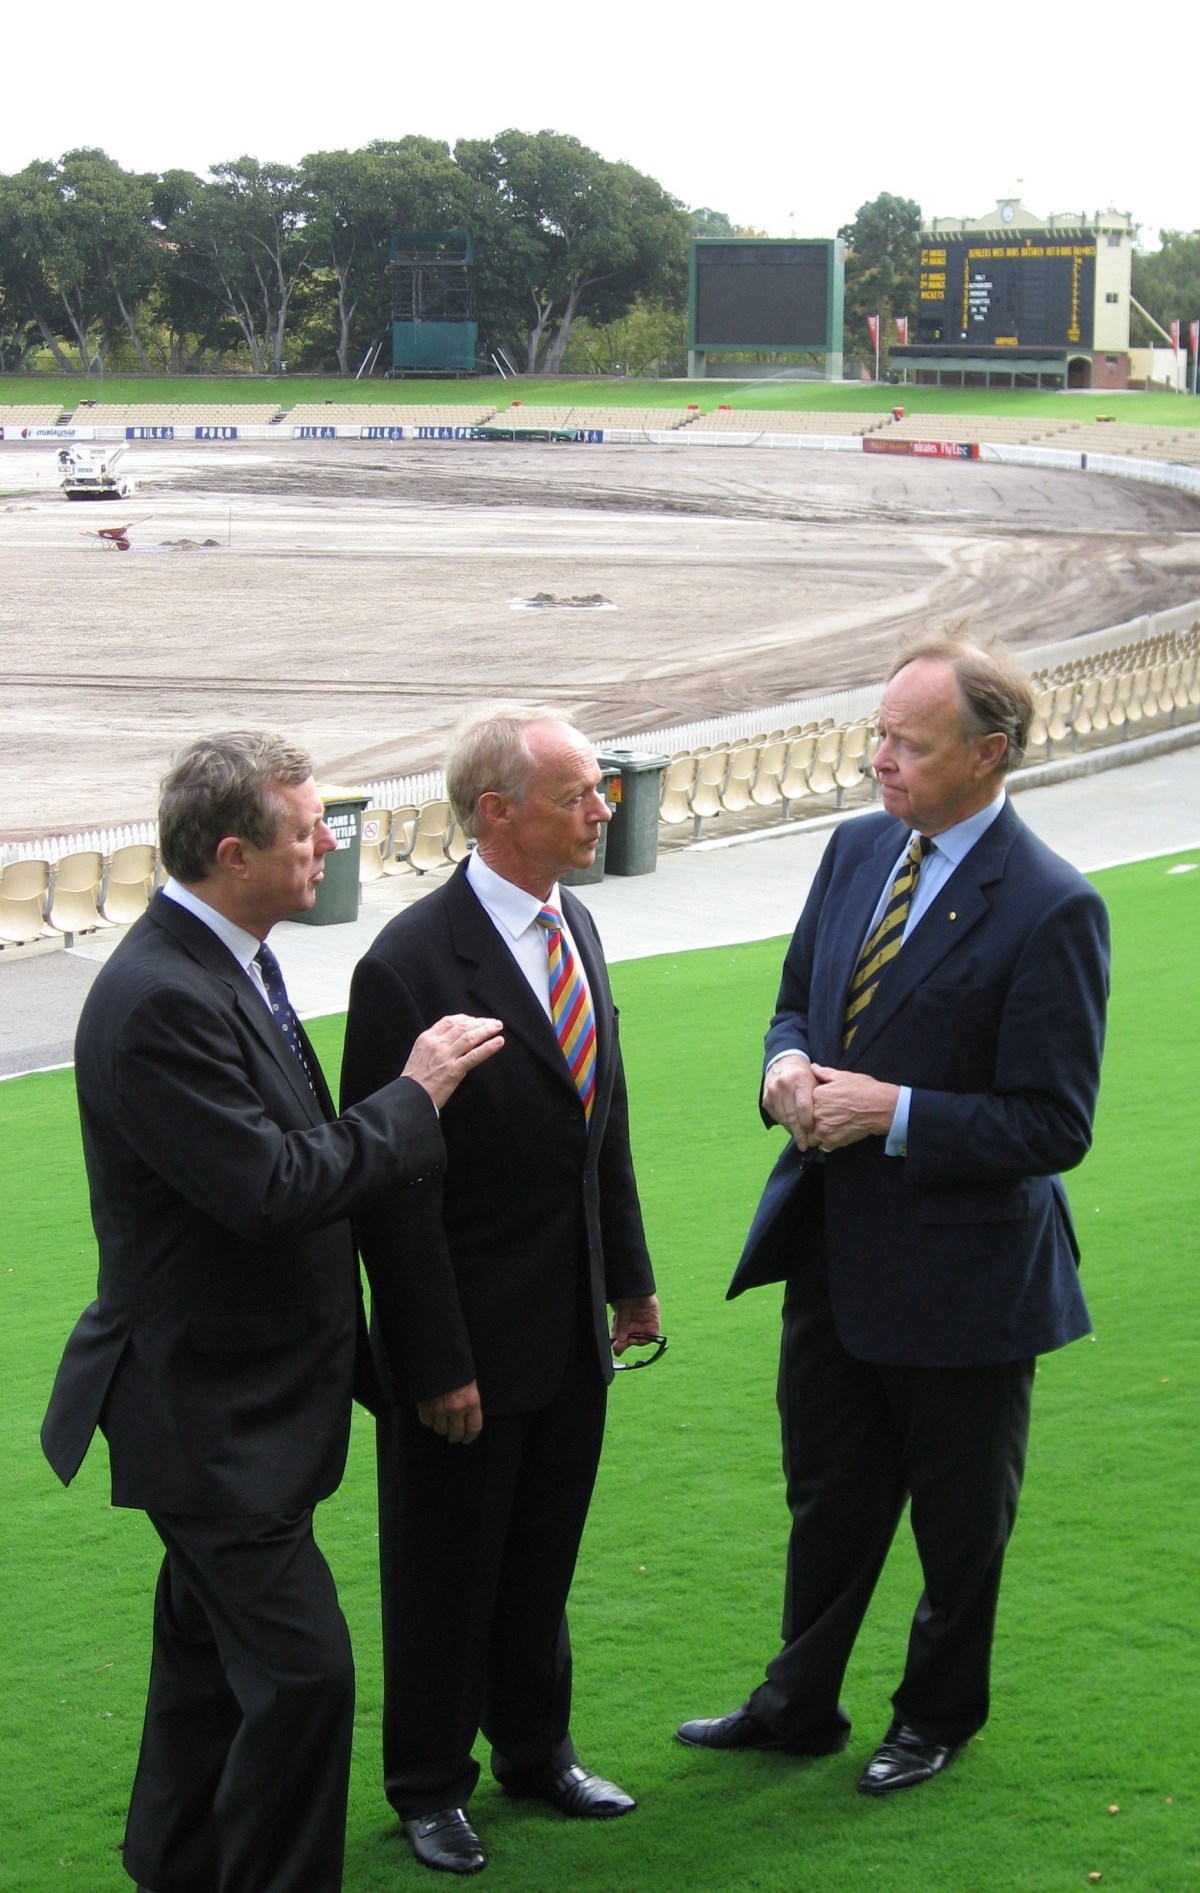 (L to R:) South Australian Premier Mike Rann, John Bradman (son of Sir Donald Bradman) and SA Cricket Association president Ian McLachlan at Adelaide Oval Friday, May 4, 2007. A $70m redevelopment of the oval will proceed after the SA government announced it would match the federal government's $25m contribution. (AAP Image/Steve Larkin) NO ARCHIVING